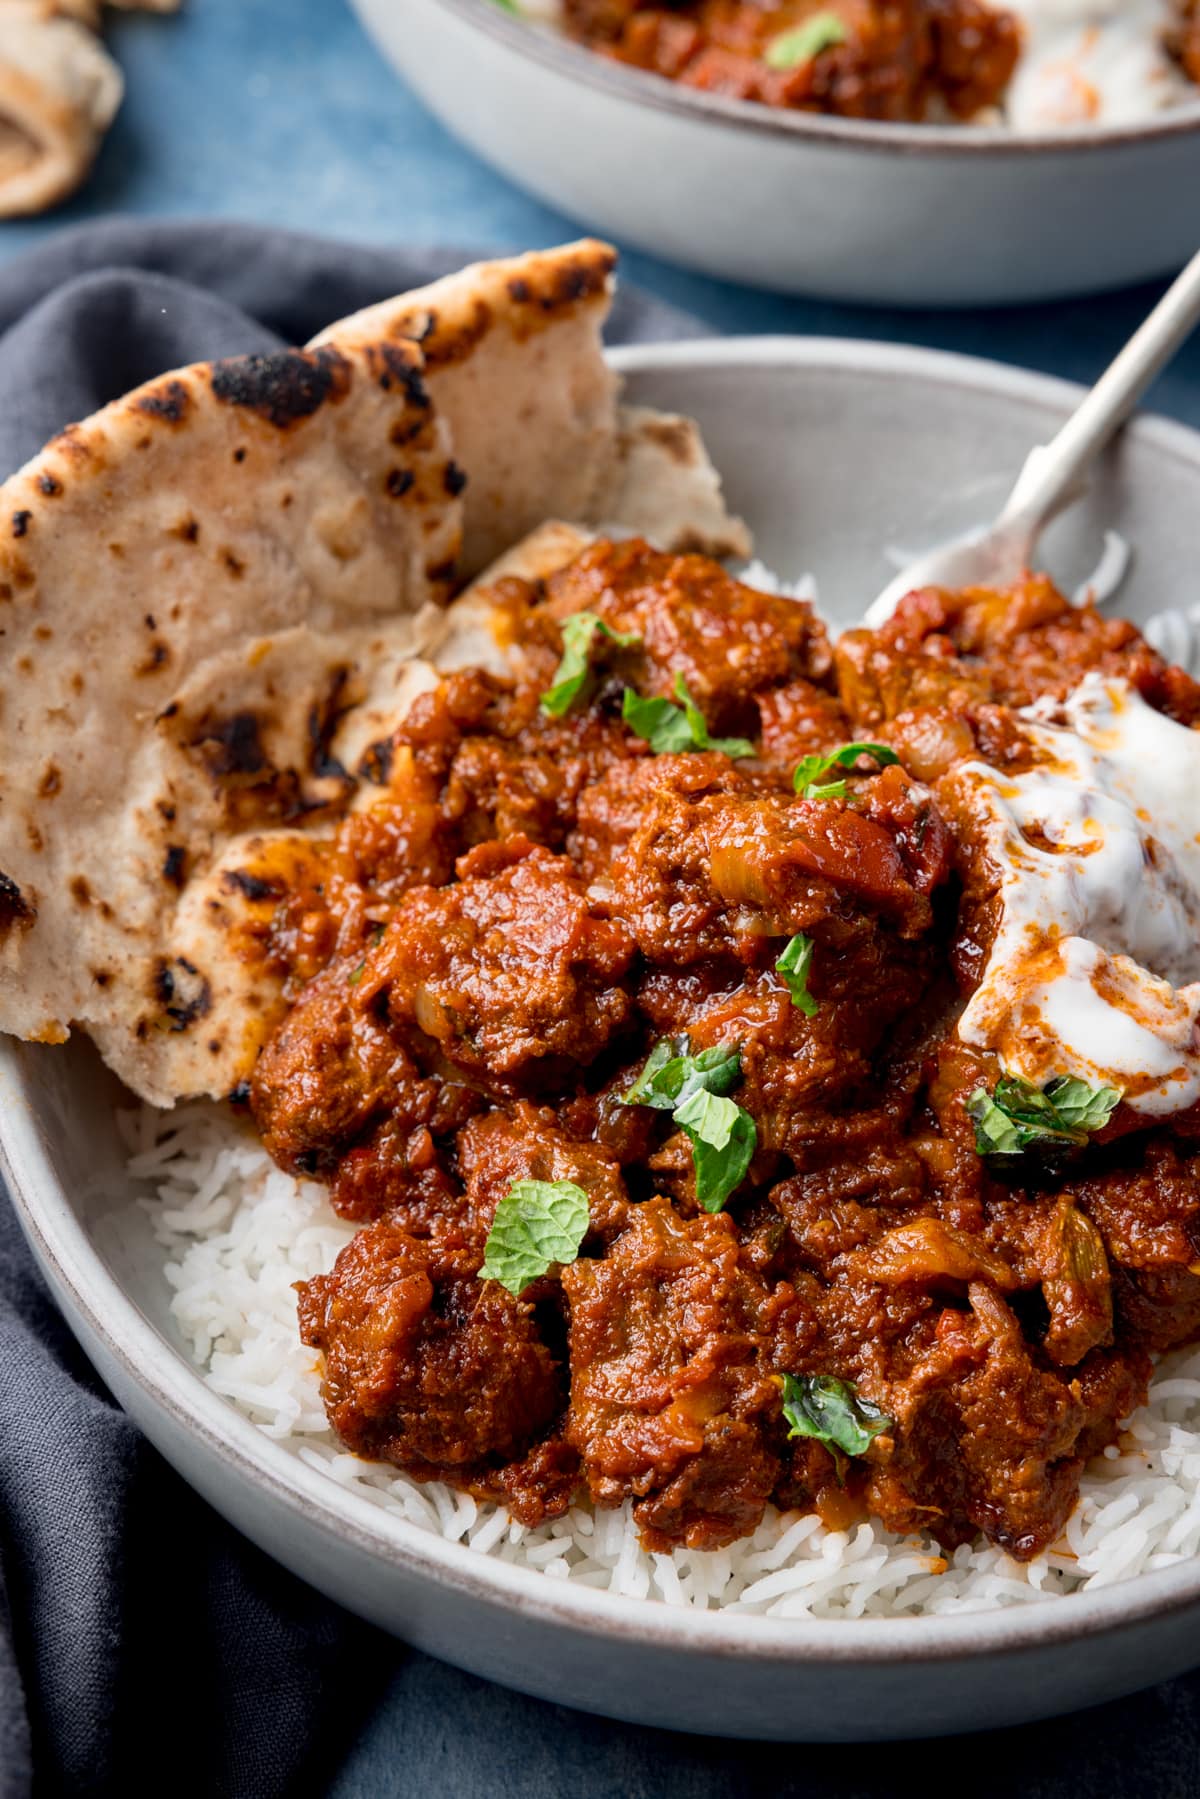 Tall image of beef rogan josh and rice in a white bowl with a piece of chapati on the side. The bowl is on a blue background, next to a blue/grey napkin. There is a further bowl at the top of the image.